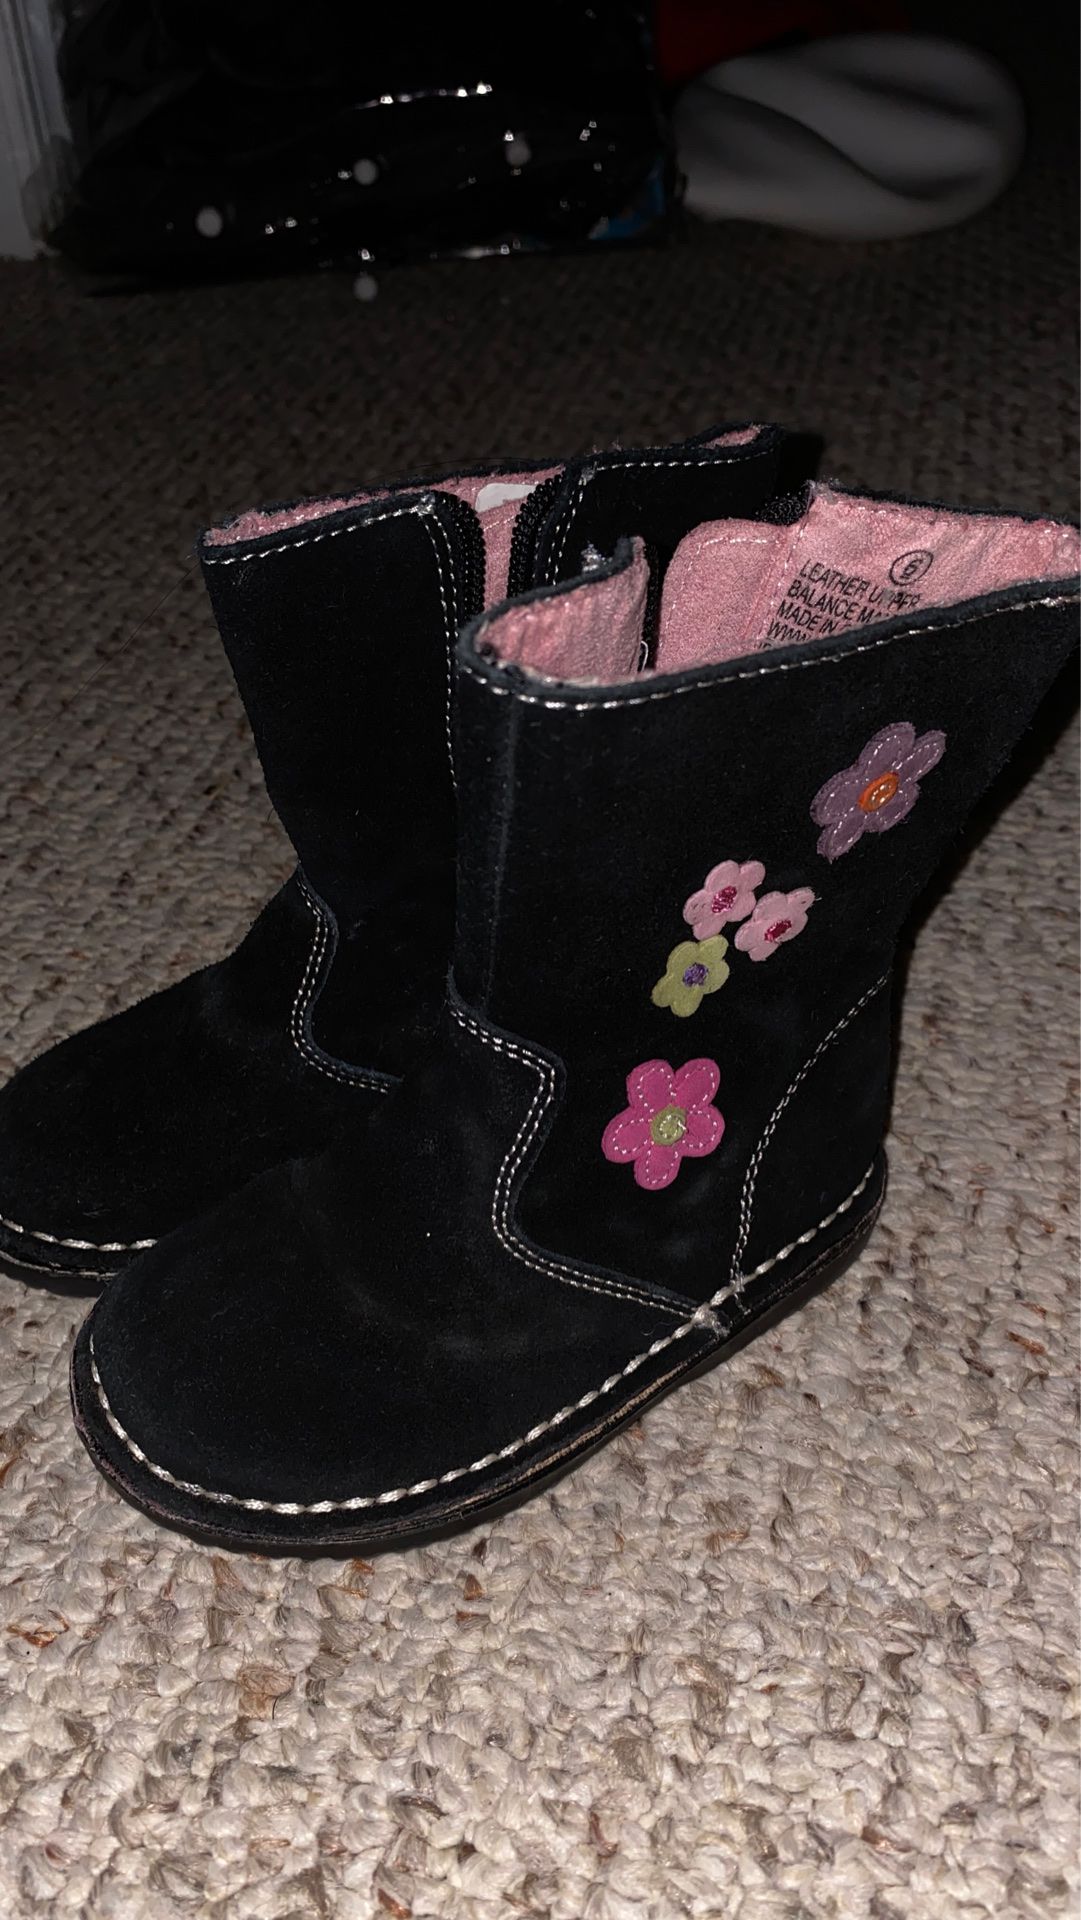 BOOTS SIZE 6 TODDLER